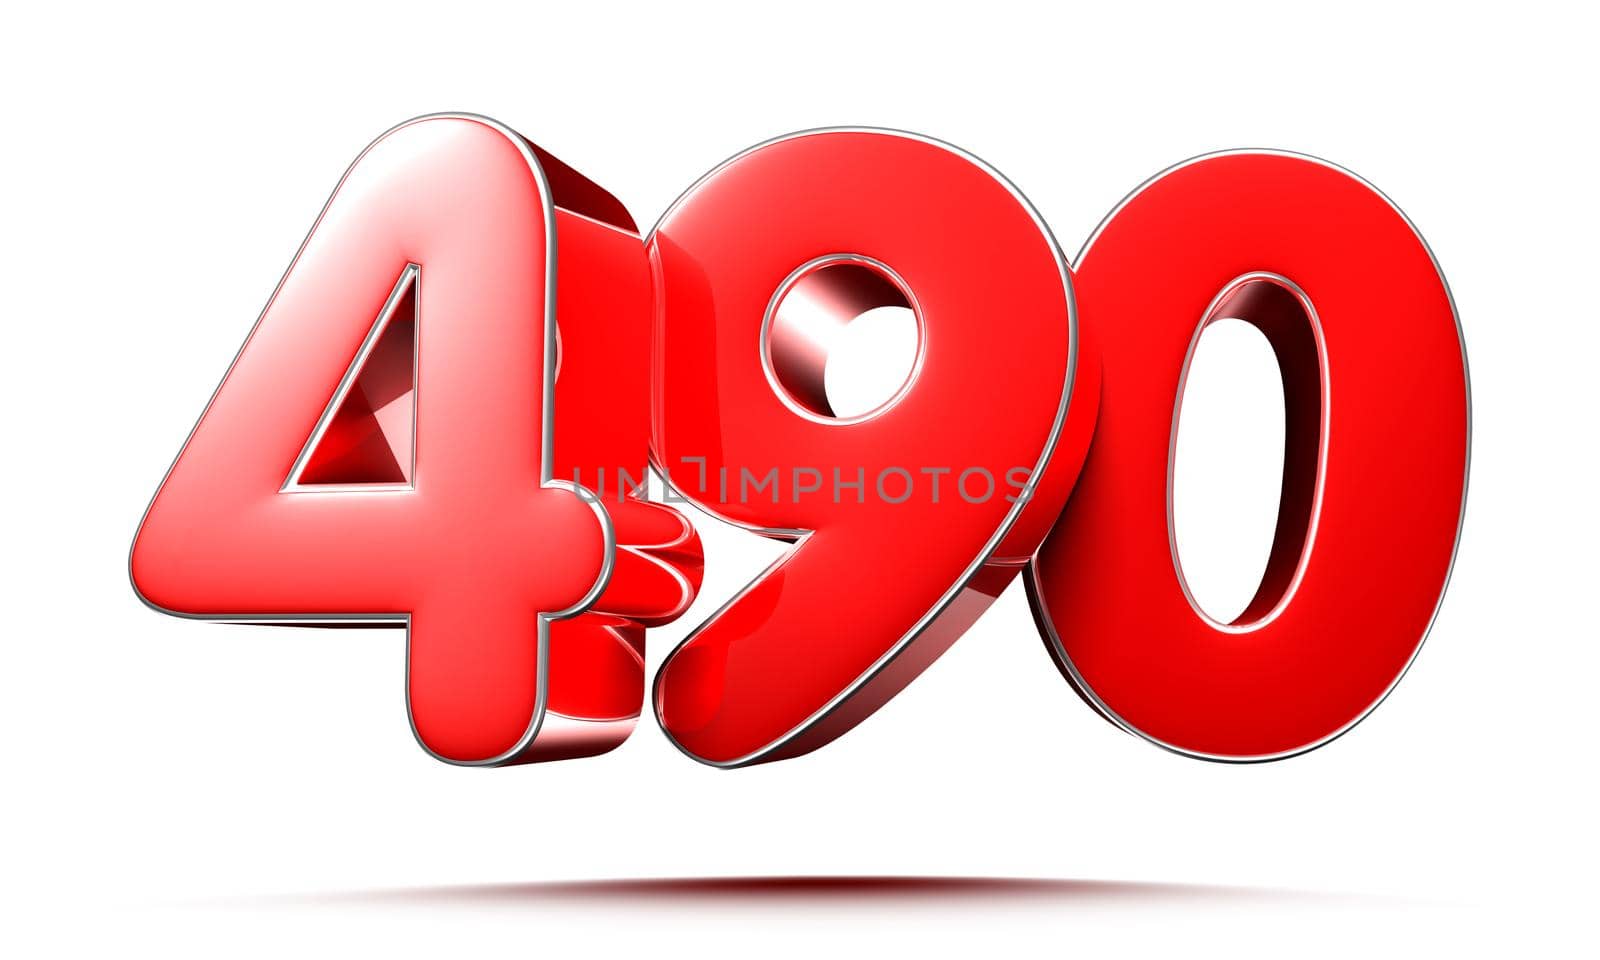 Rounded red numbers 490 on white background 3D illustration with clipping path by thitimontoyai